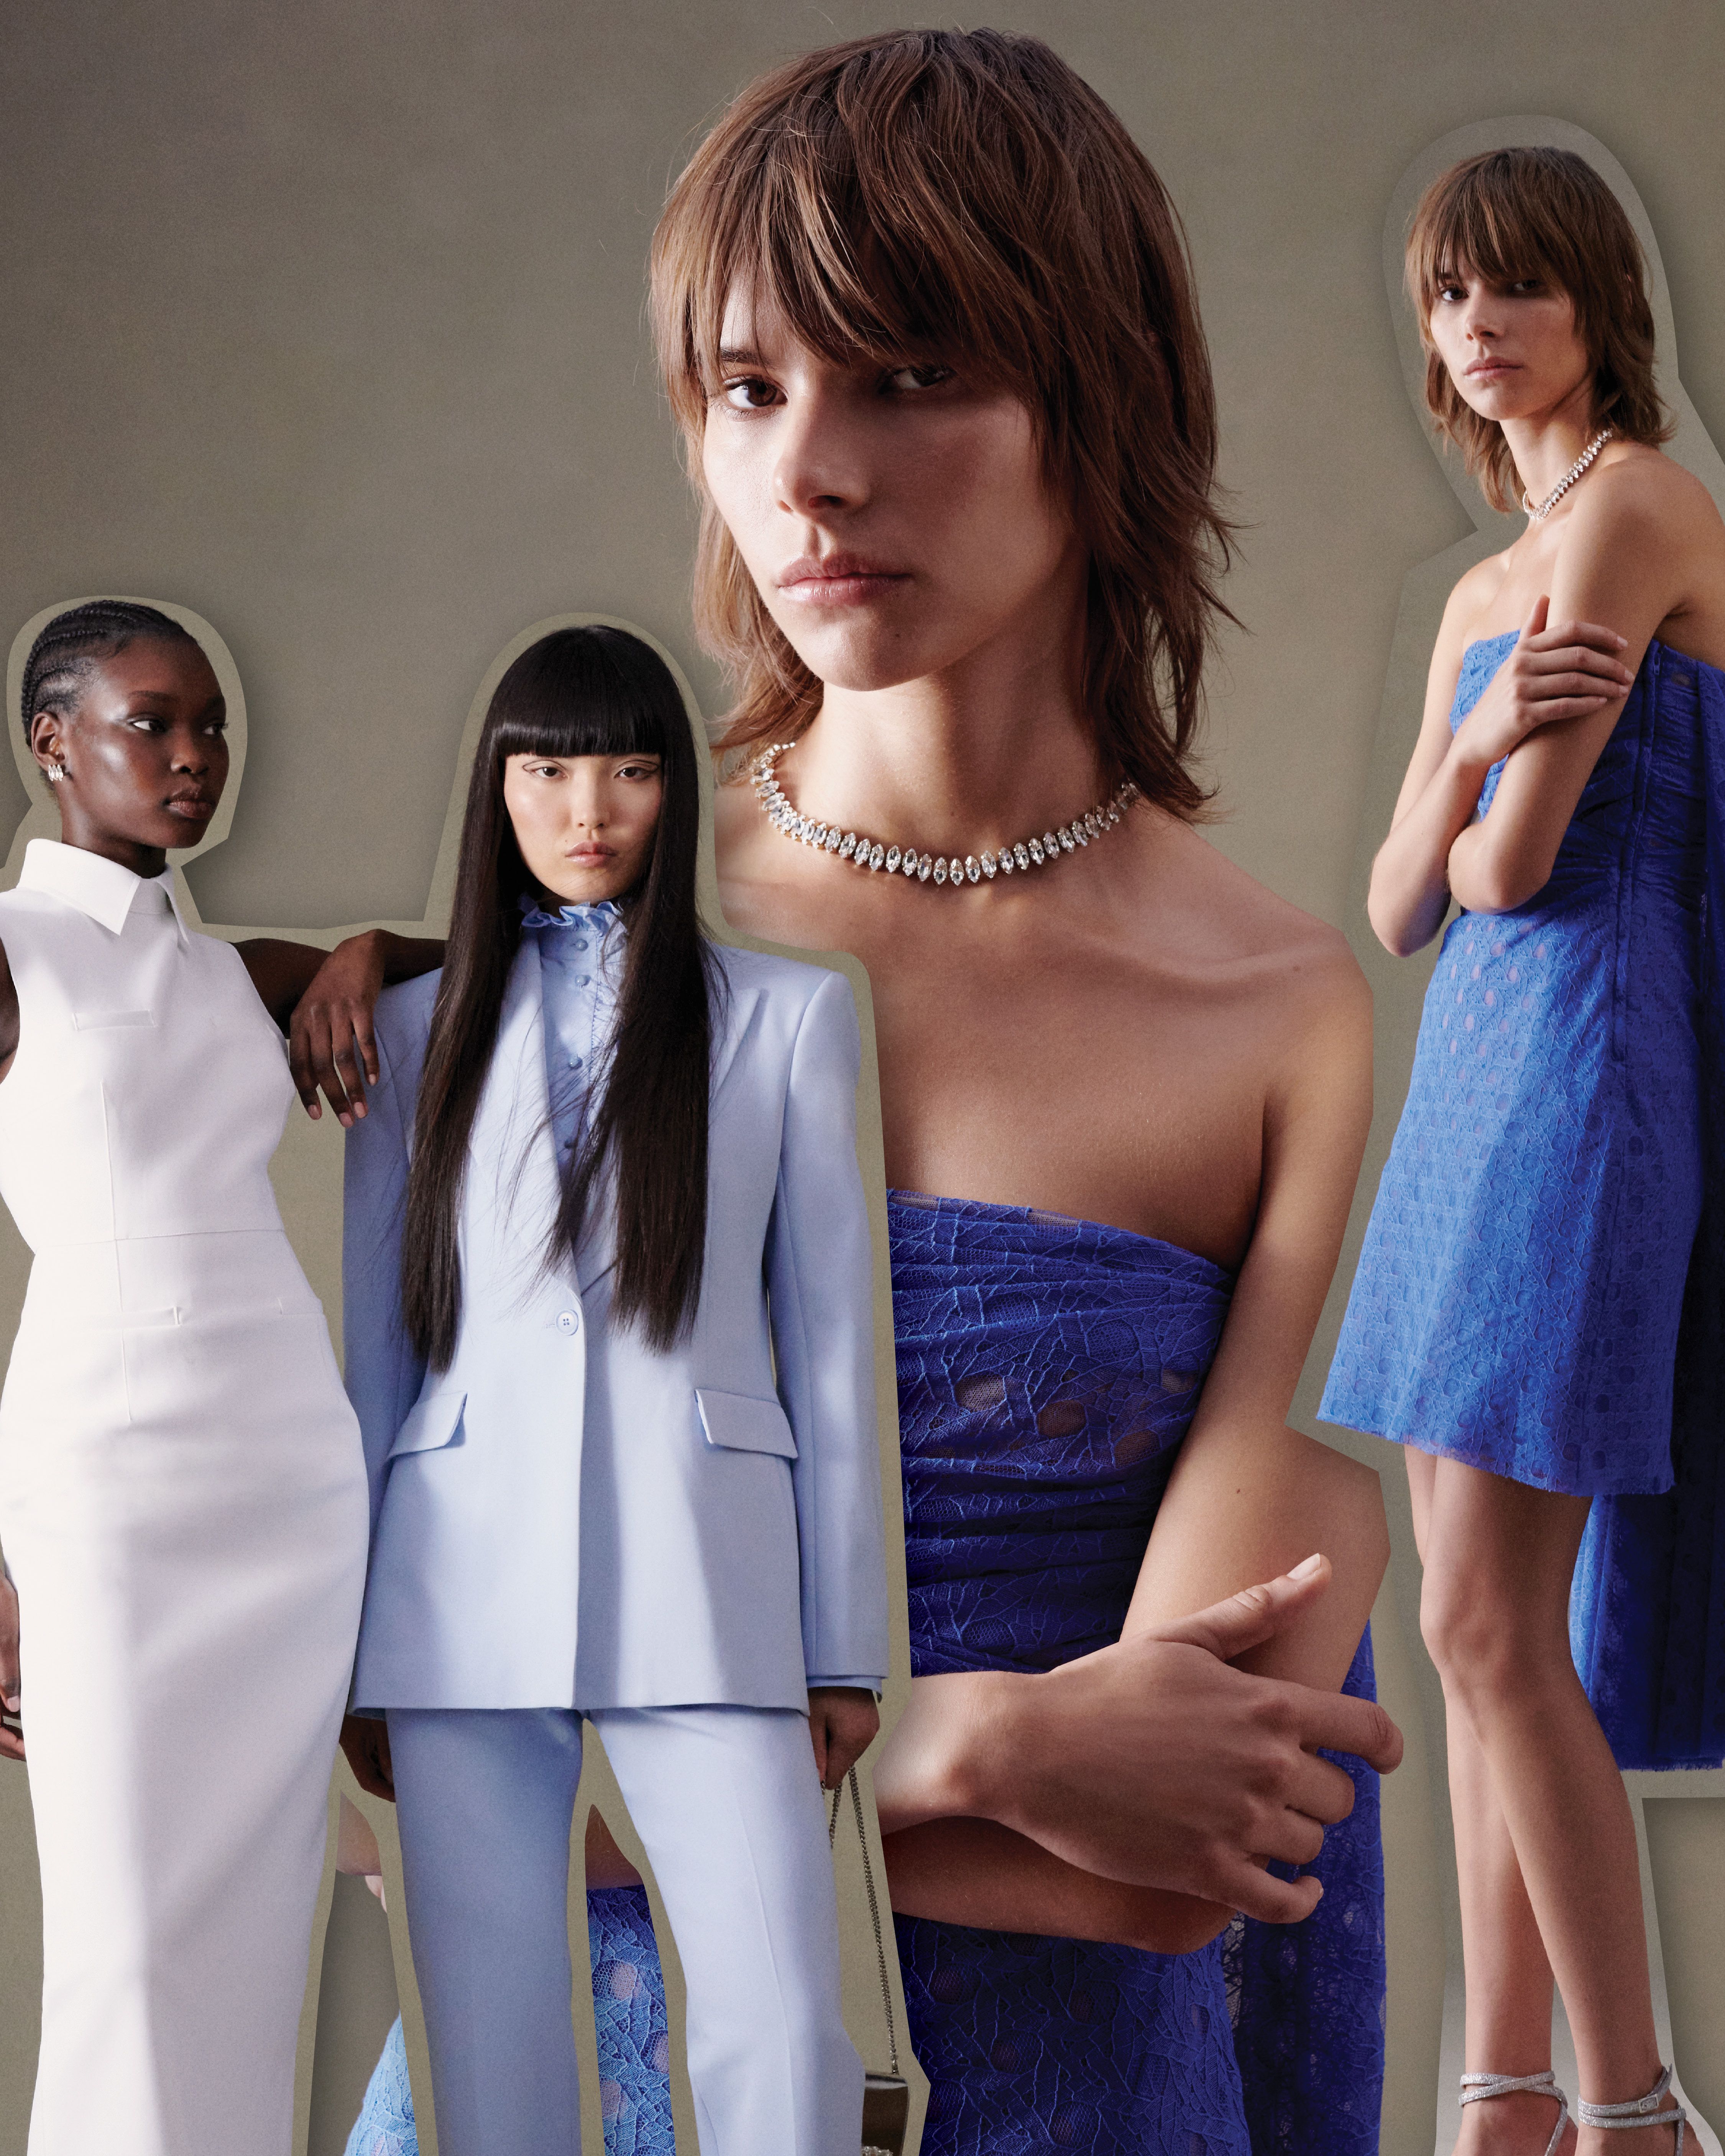 Collage of four models wearing varying shades of blue and white in dresses and tailoring